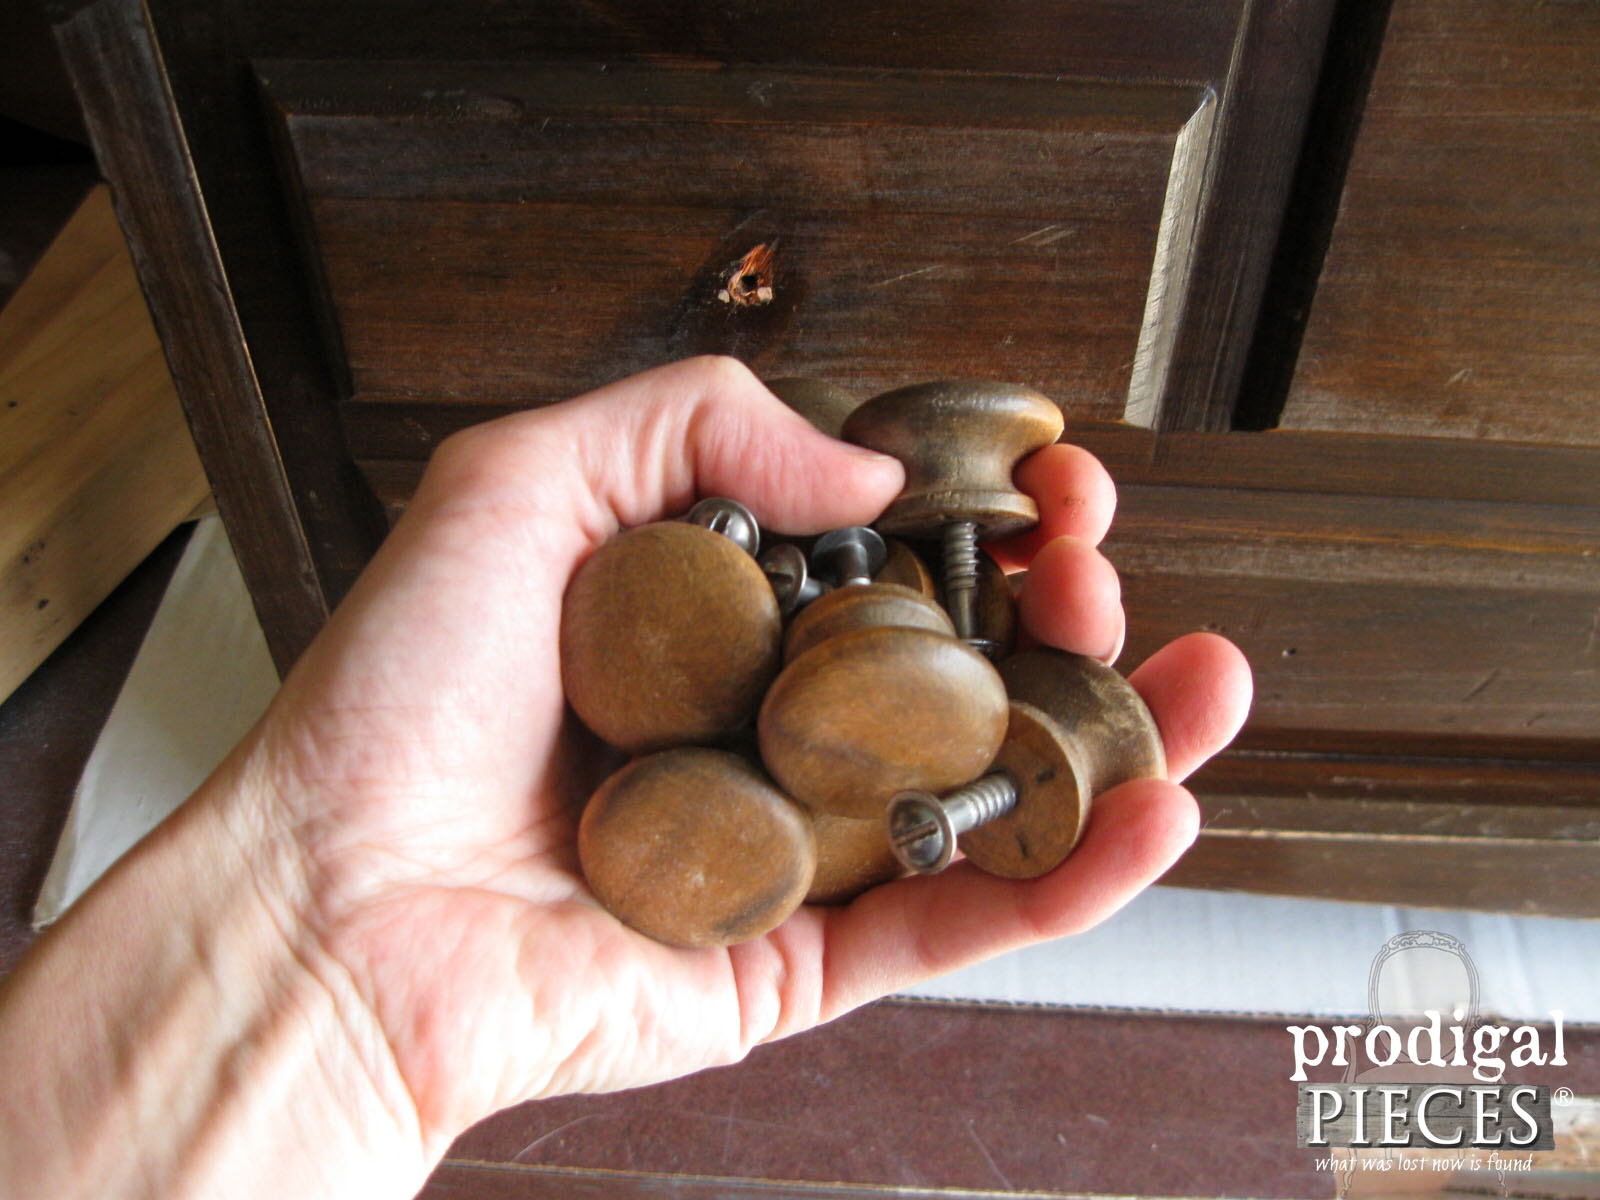 Replacing Plastic Knobs with Wooden Knobs for DIY Wooden Chest | Prodigal Pieces | prodigalpieces.com